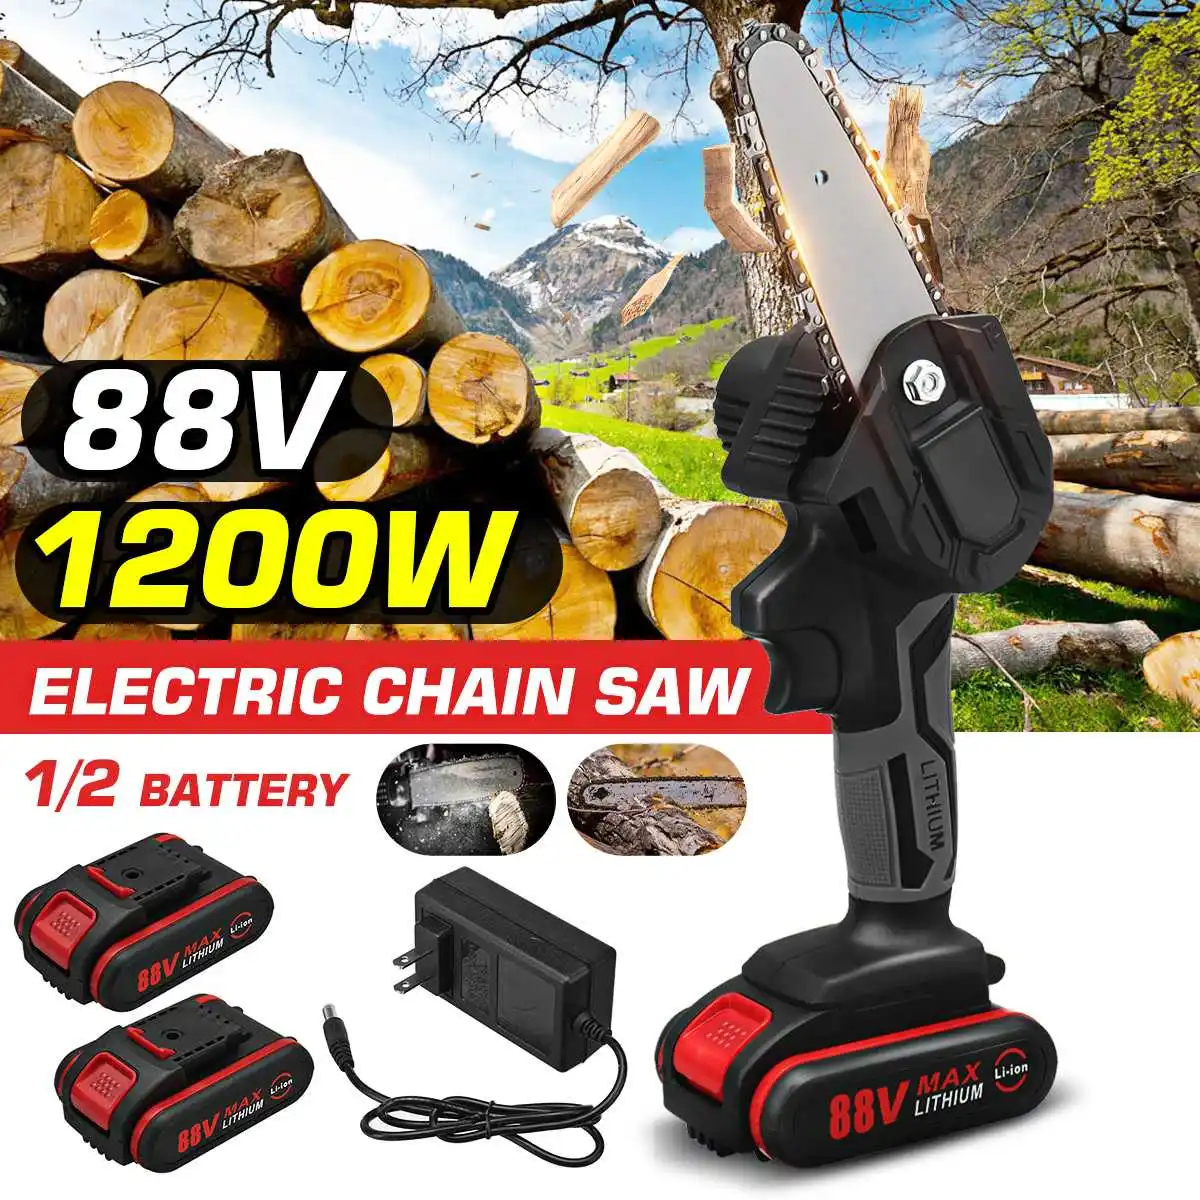 

88V 4 Inch 1200W Mini Pruning Saw Electric Chainsaws One-Handed Garden Trimming Logging Electric Saw Power Tools With 2 Battery